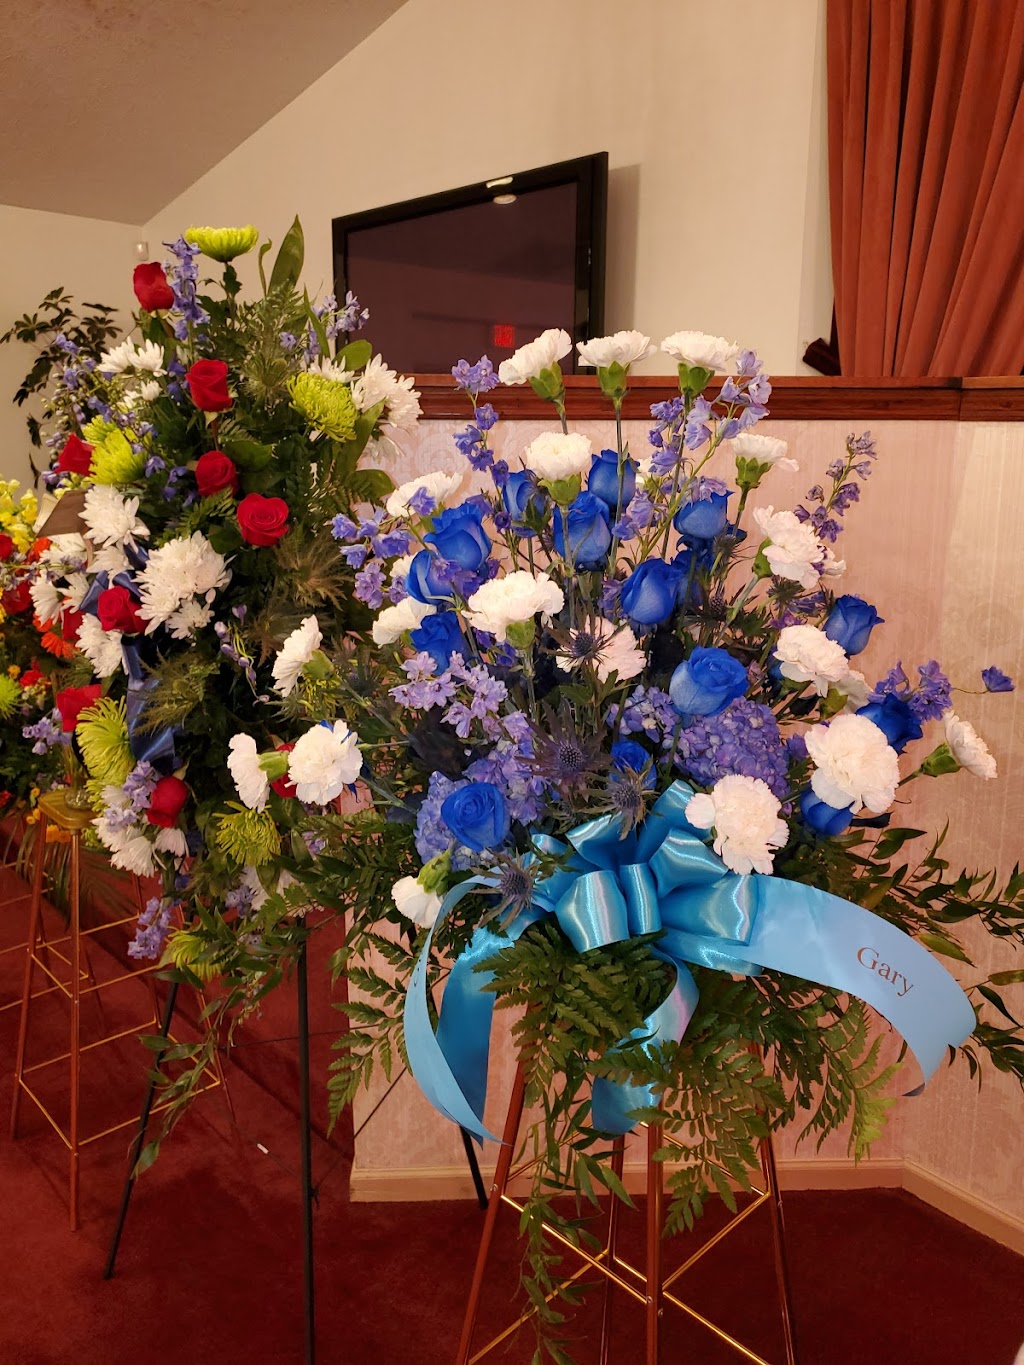 House Of Wheat Funeral Home | 2107 N Gettysburg Ave, Dayton, OH 45406, USA | Phone: (937) 274-1693